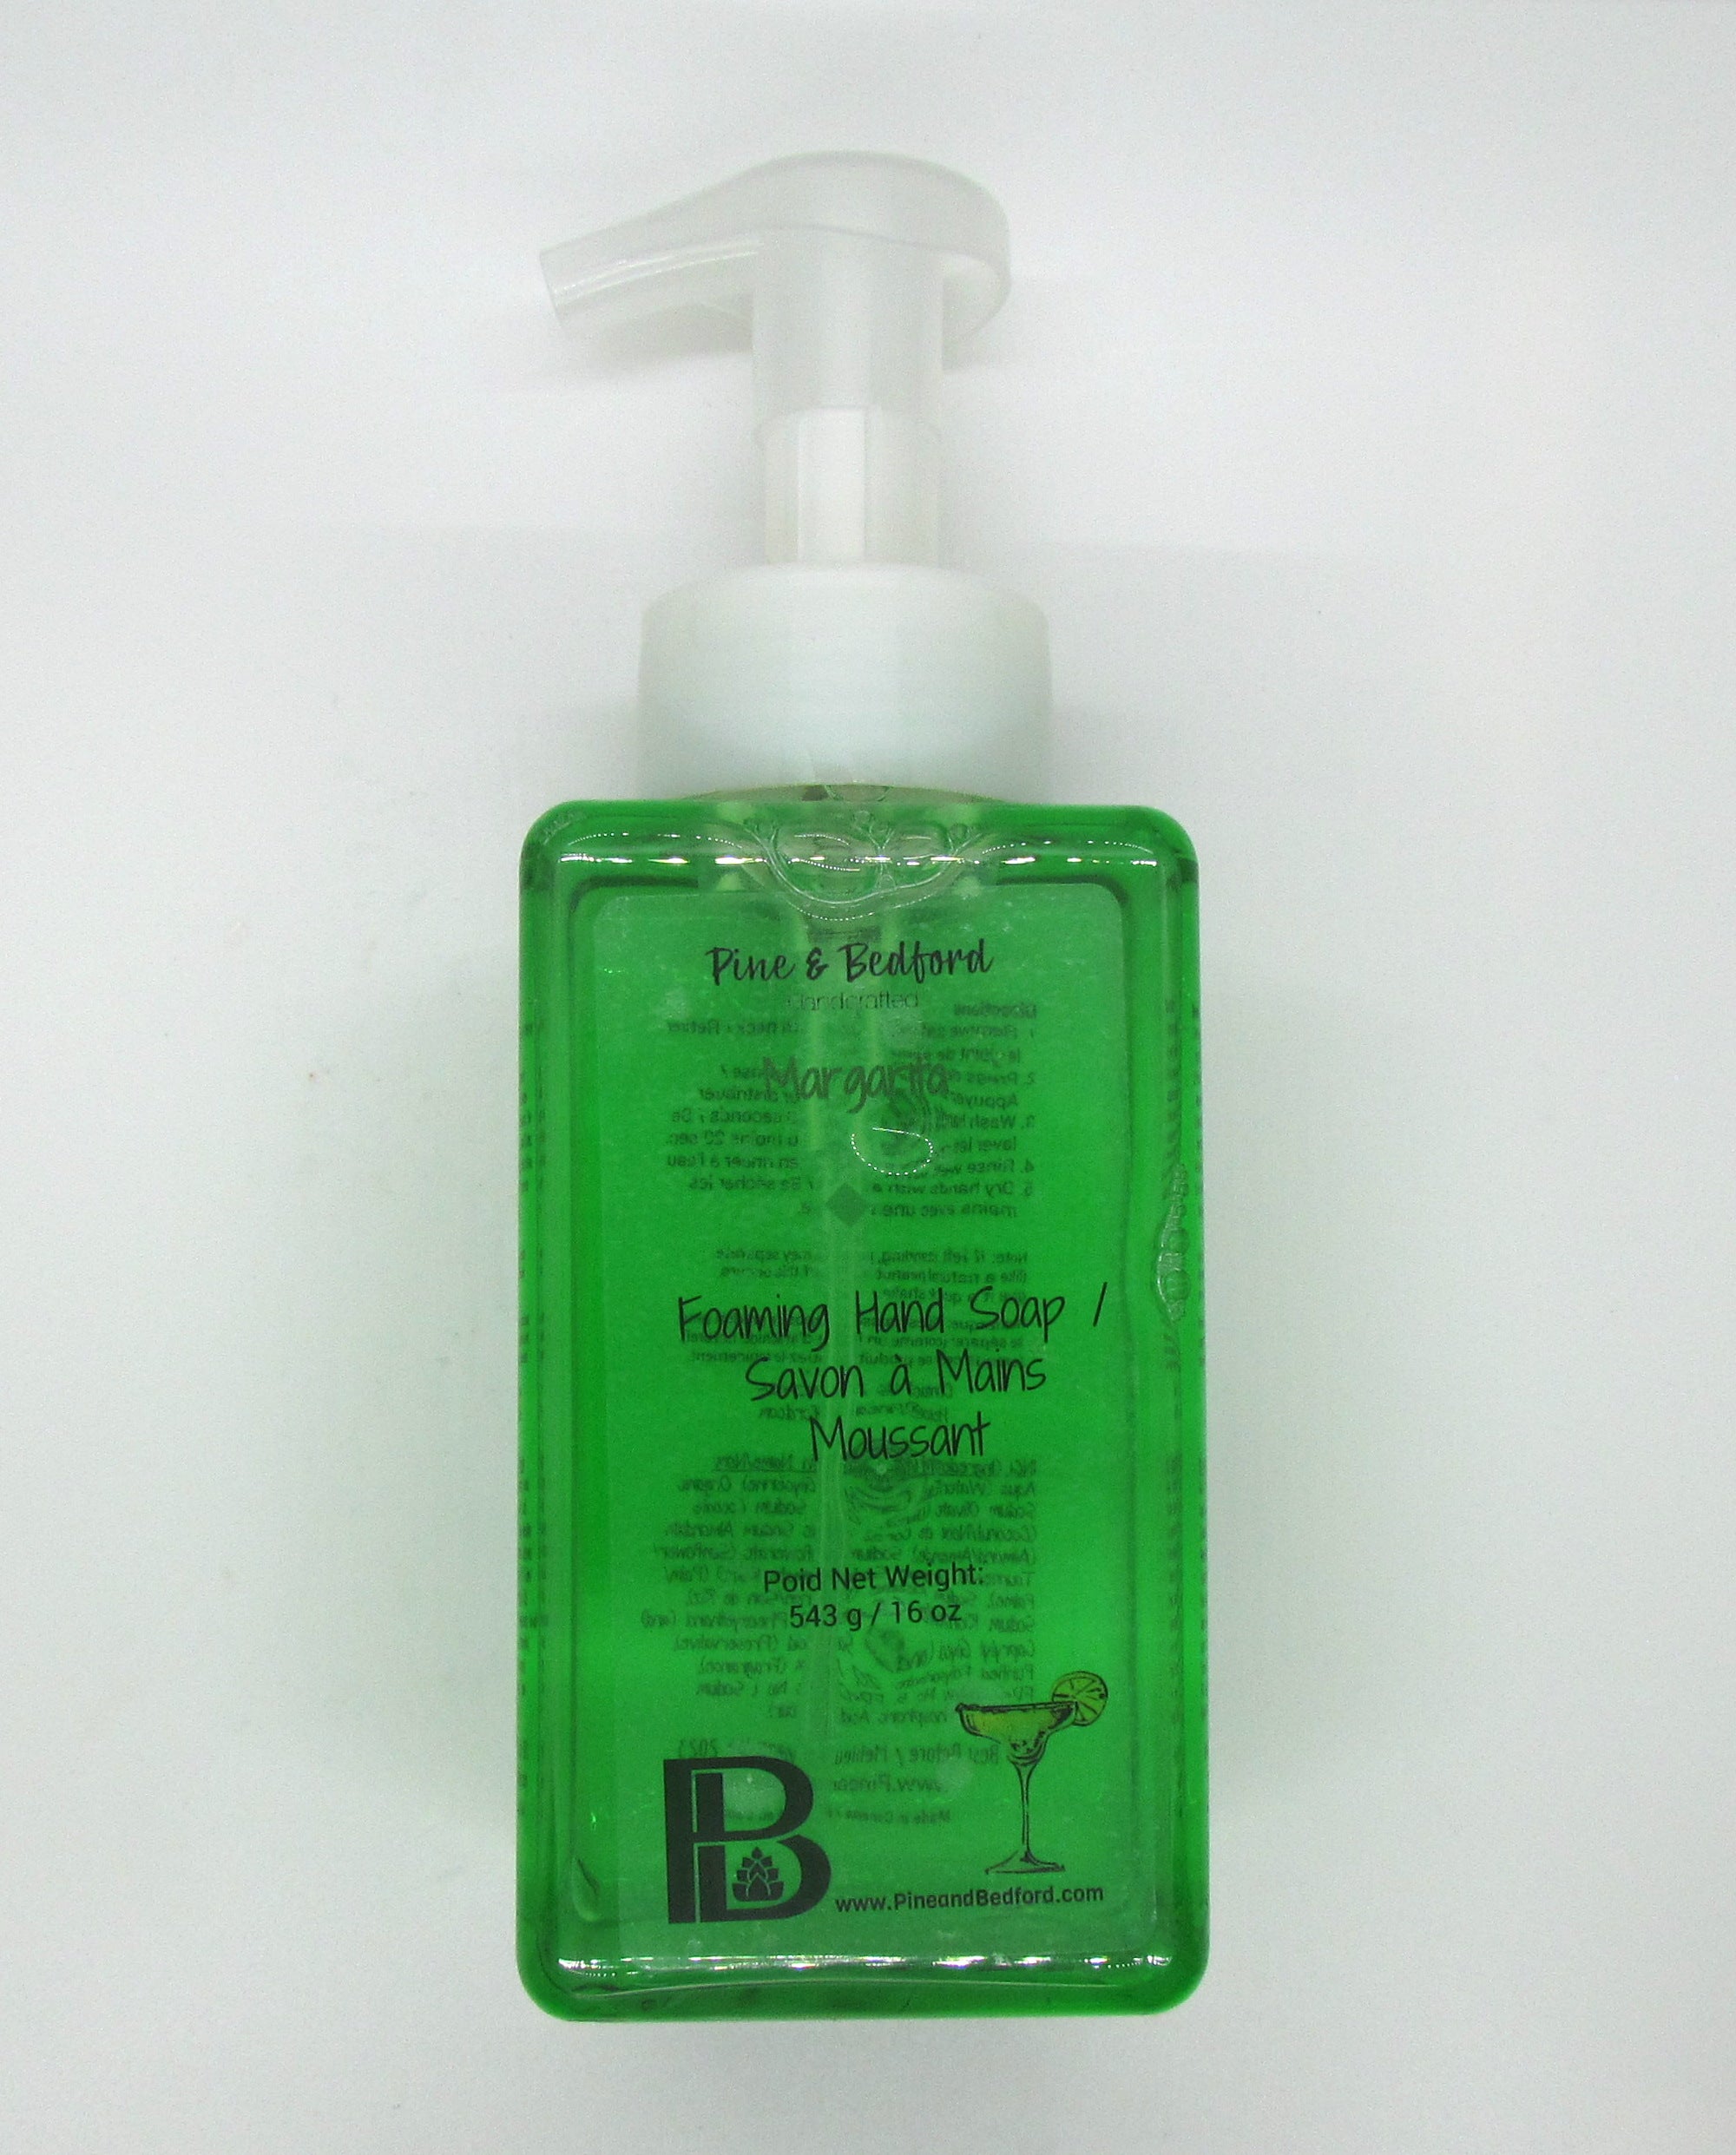 Pine & Bedford's Foaming Hand Soap made with Sweet Almond, Rice Bran and Castor Oils.  Available in an assortment of Fragrances and Essential Oils.  Margarita fragrance shown here.